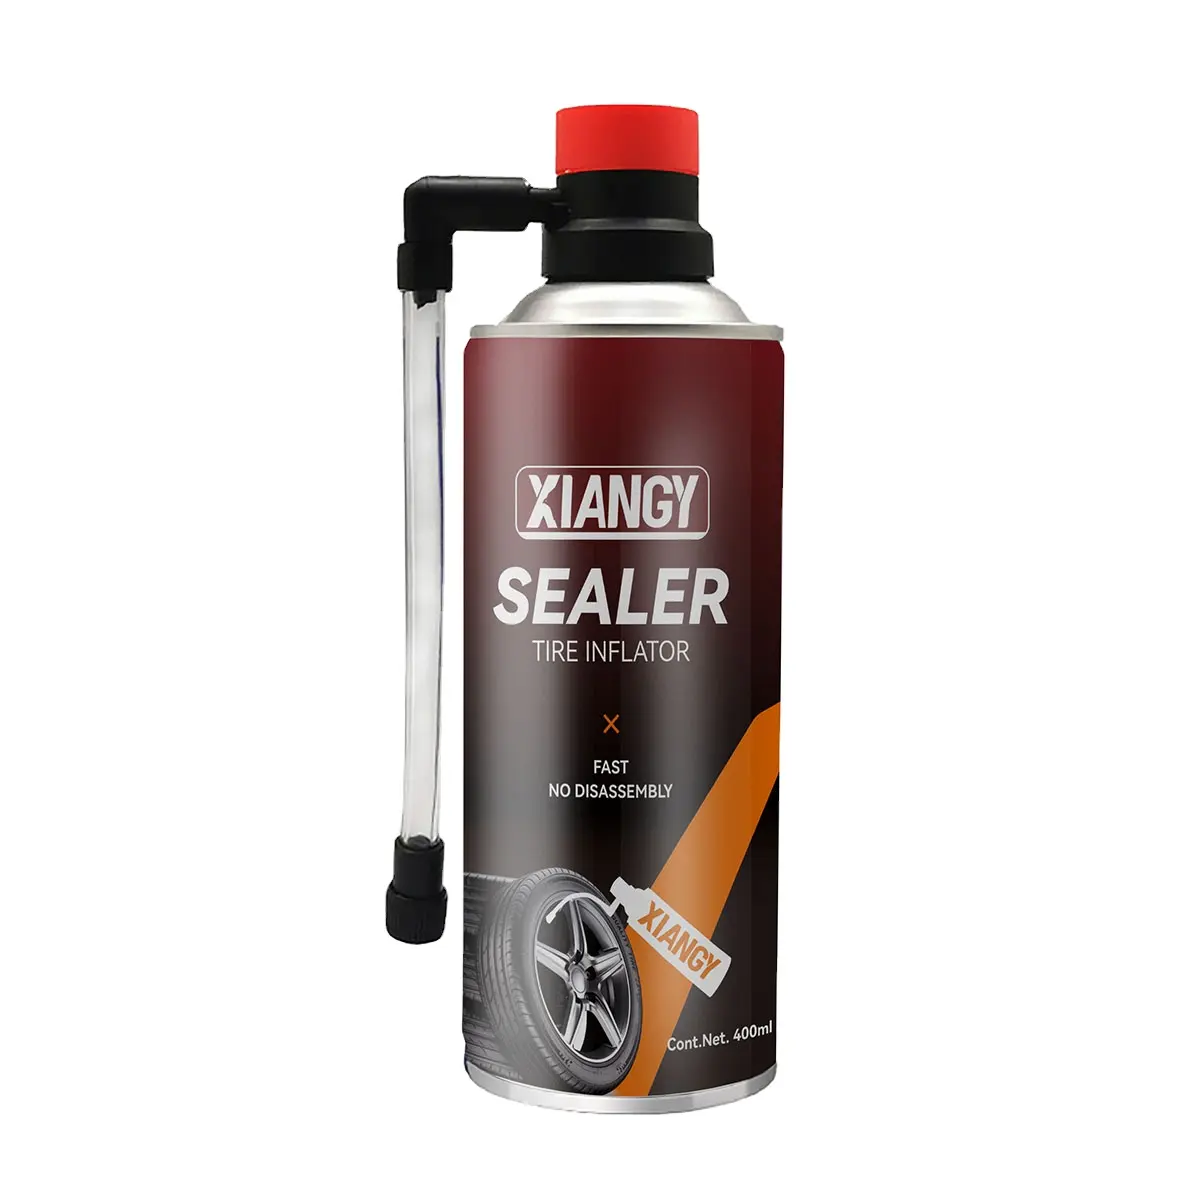 Aerosol Car Tire Inflator Tyre Flat Tire Puncture Repair Sealant And Fix Sealer Inflator Spray For Car